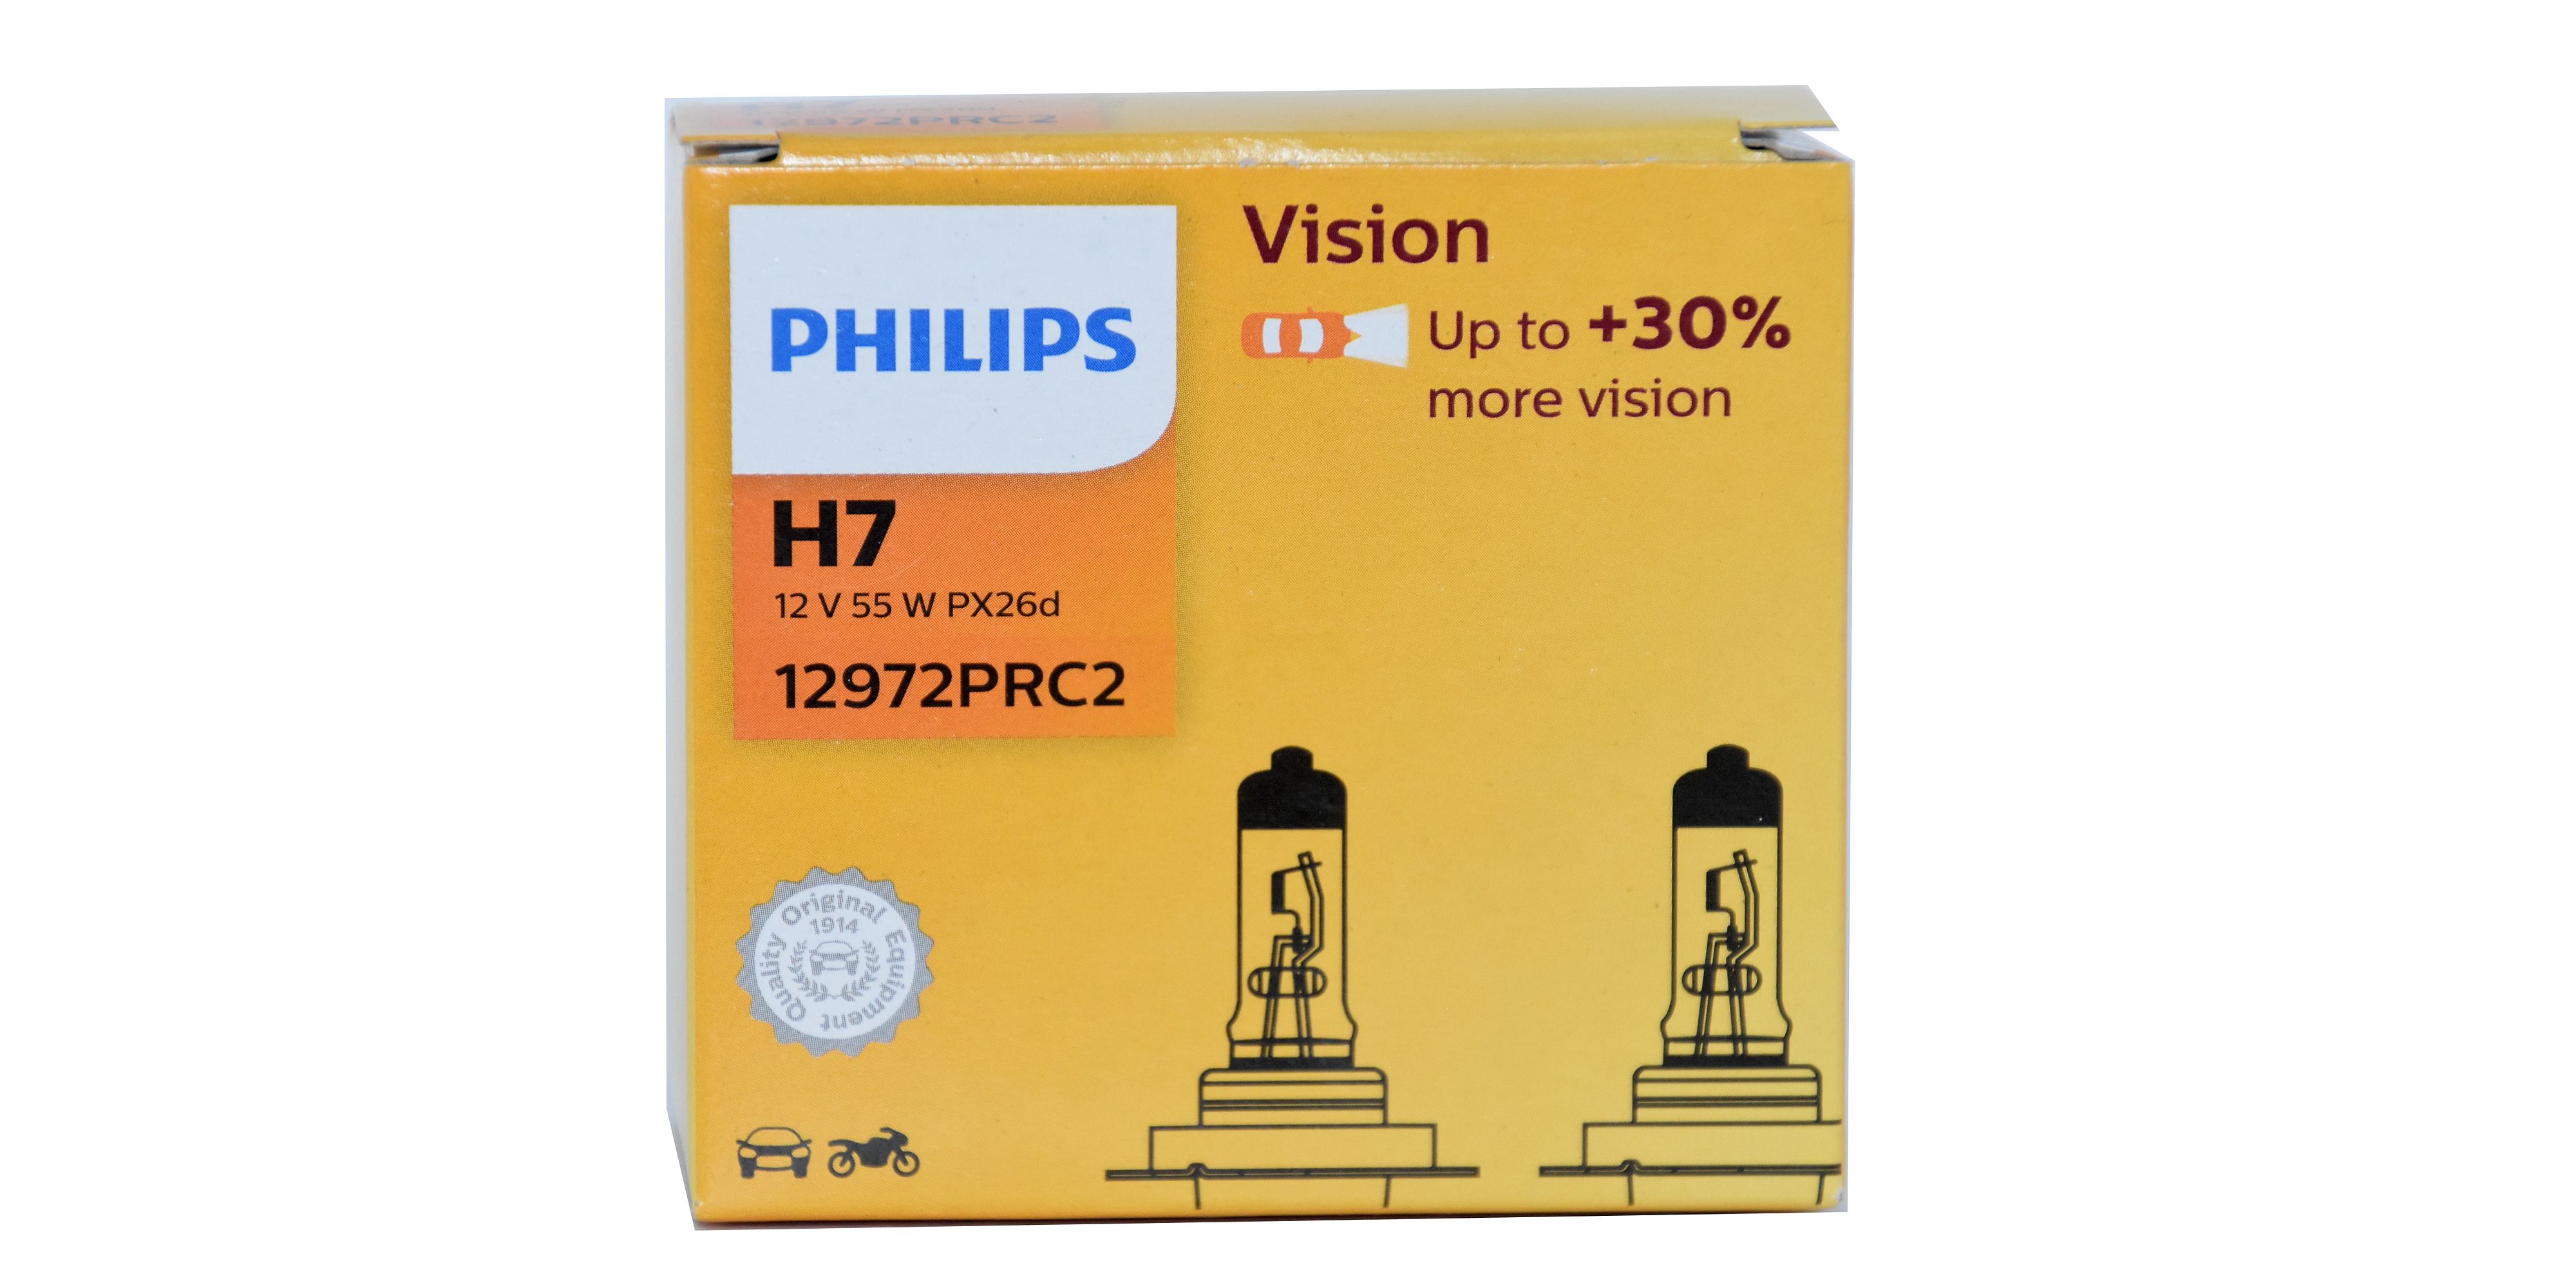 Philips WhiteVision ultra H7 (2 x 12V 55W + 2 x W5W) desde 23,87 €